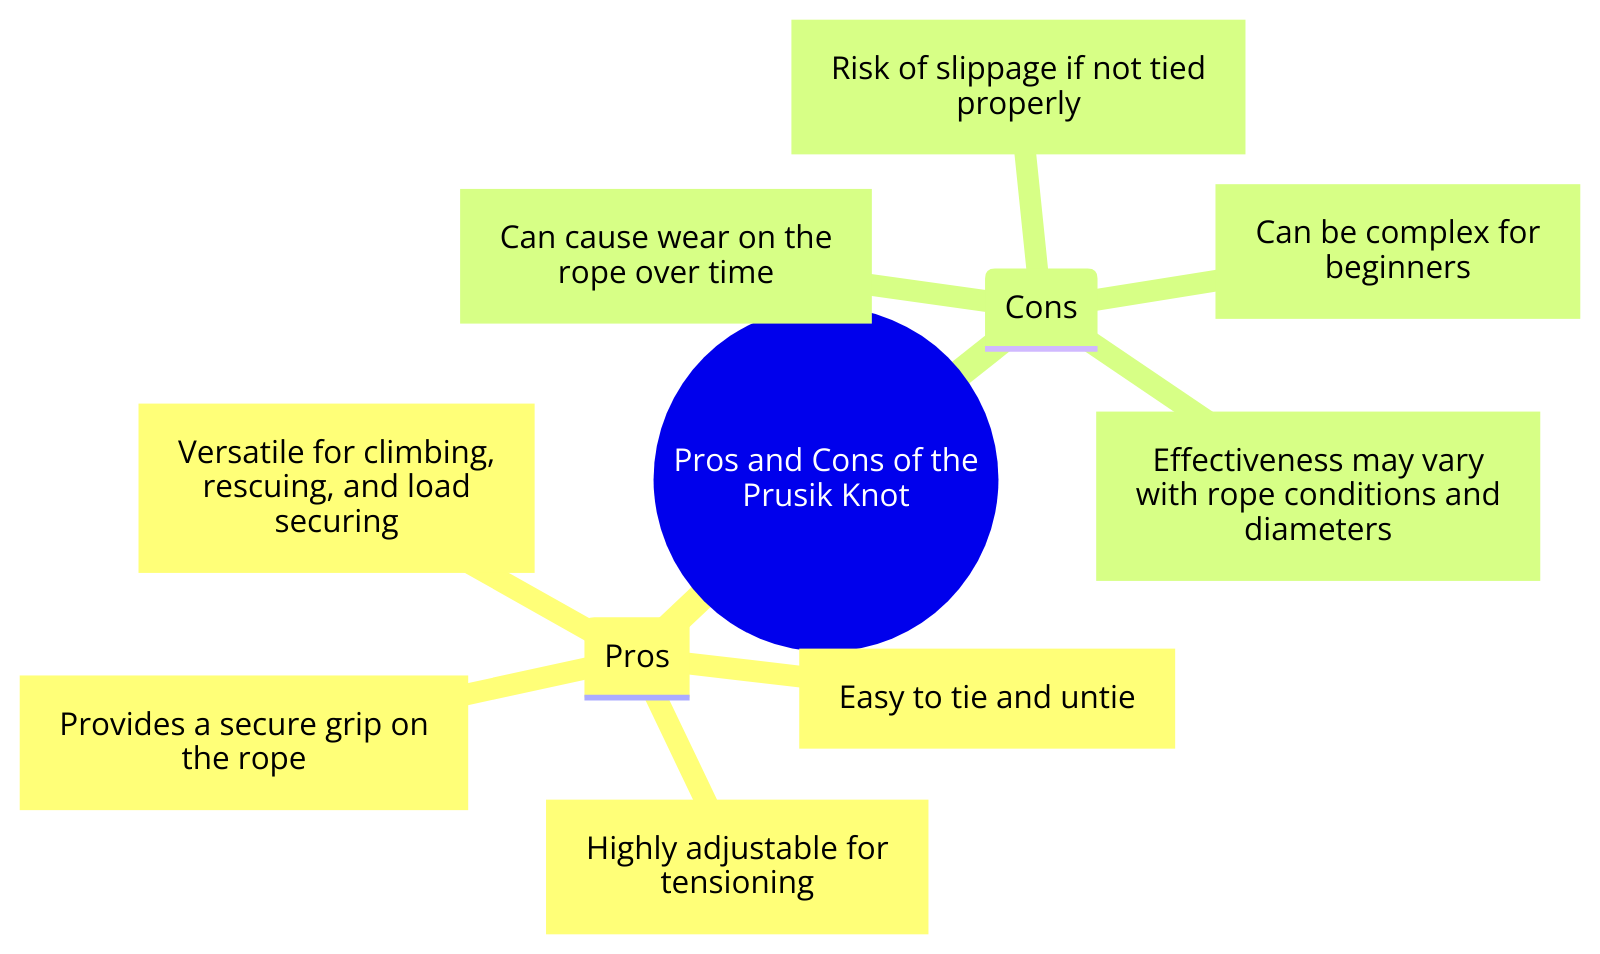 the pros and cons of the Prusik Knot